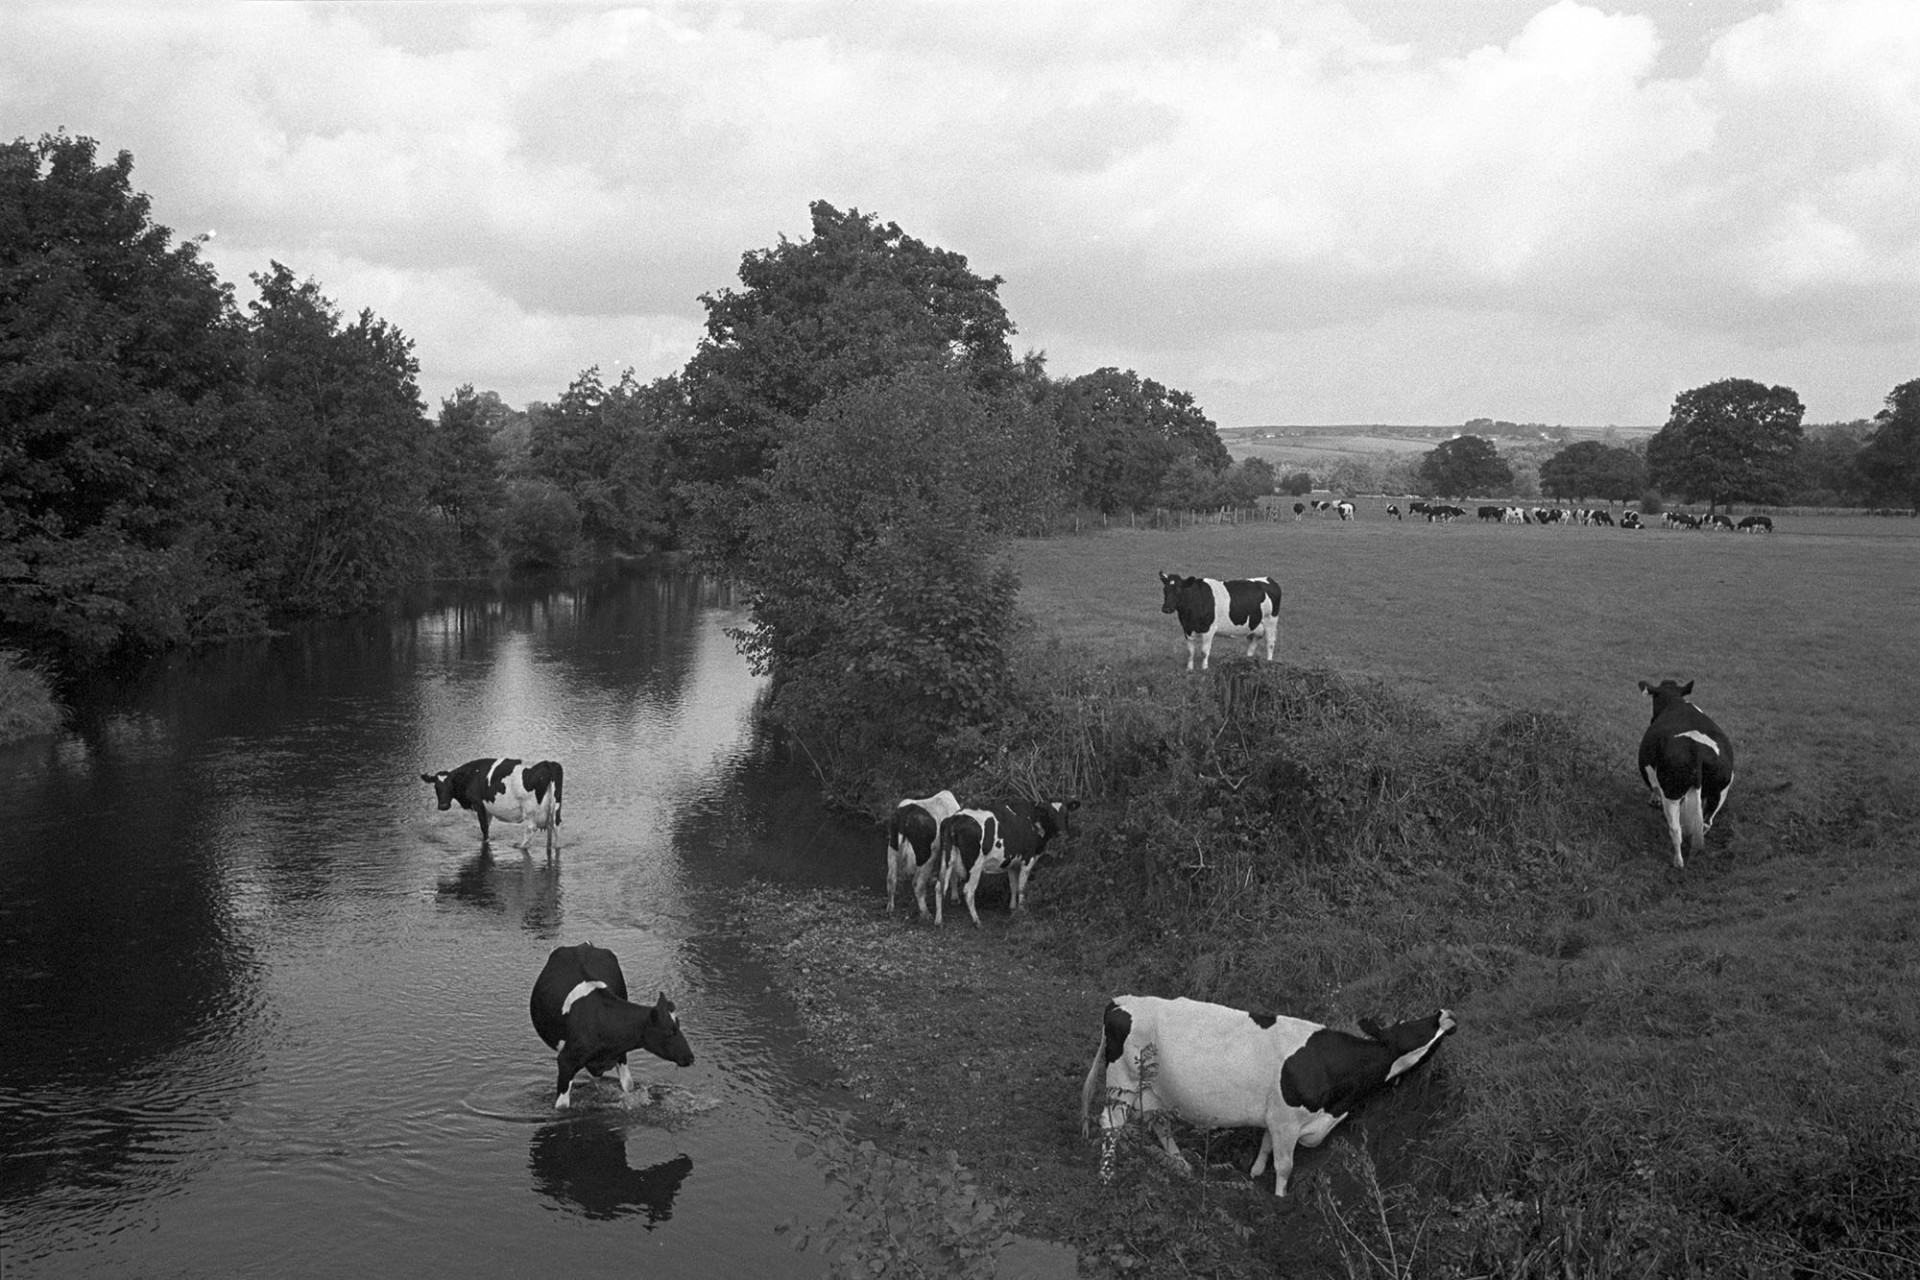 Cows drinking and wading in river. 
[Cows cooling off in the River Taw at Bridge Reeve, Ashreigney. More cattle can be seen grazing in the field in the background.]